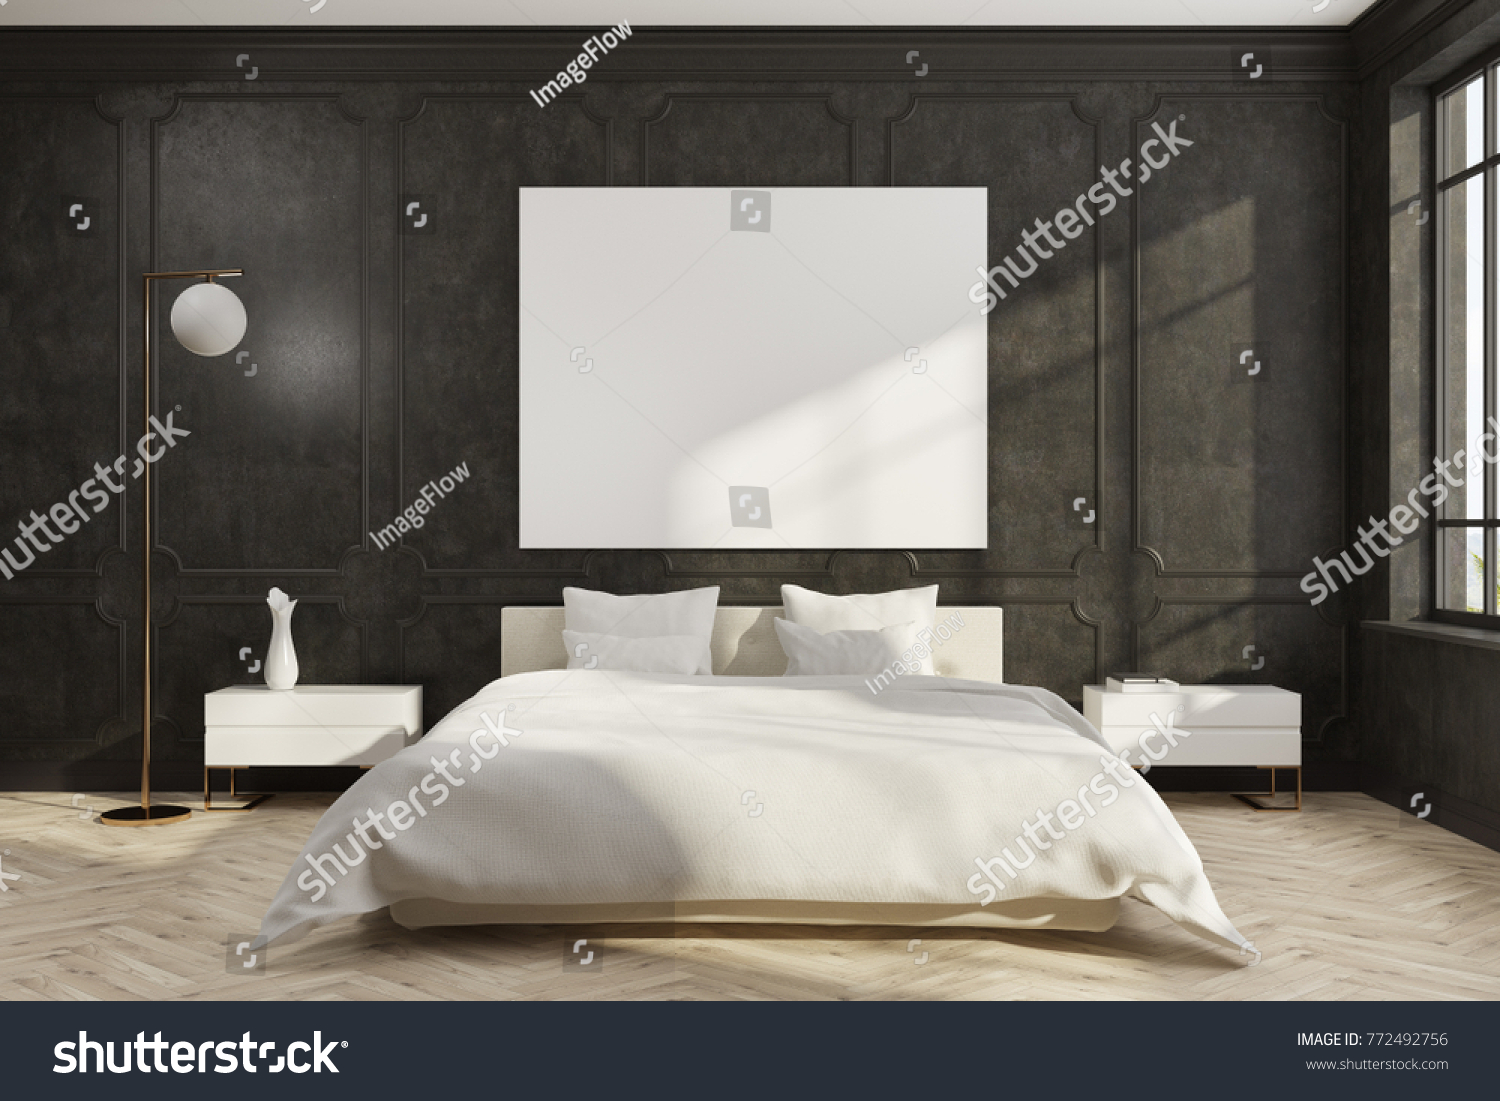 Black bedroom interior with a wooden floor, a white master bed, two bedside tables and a poster. 3d rendering mock up #772492756